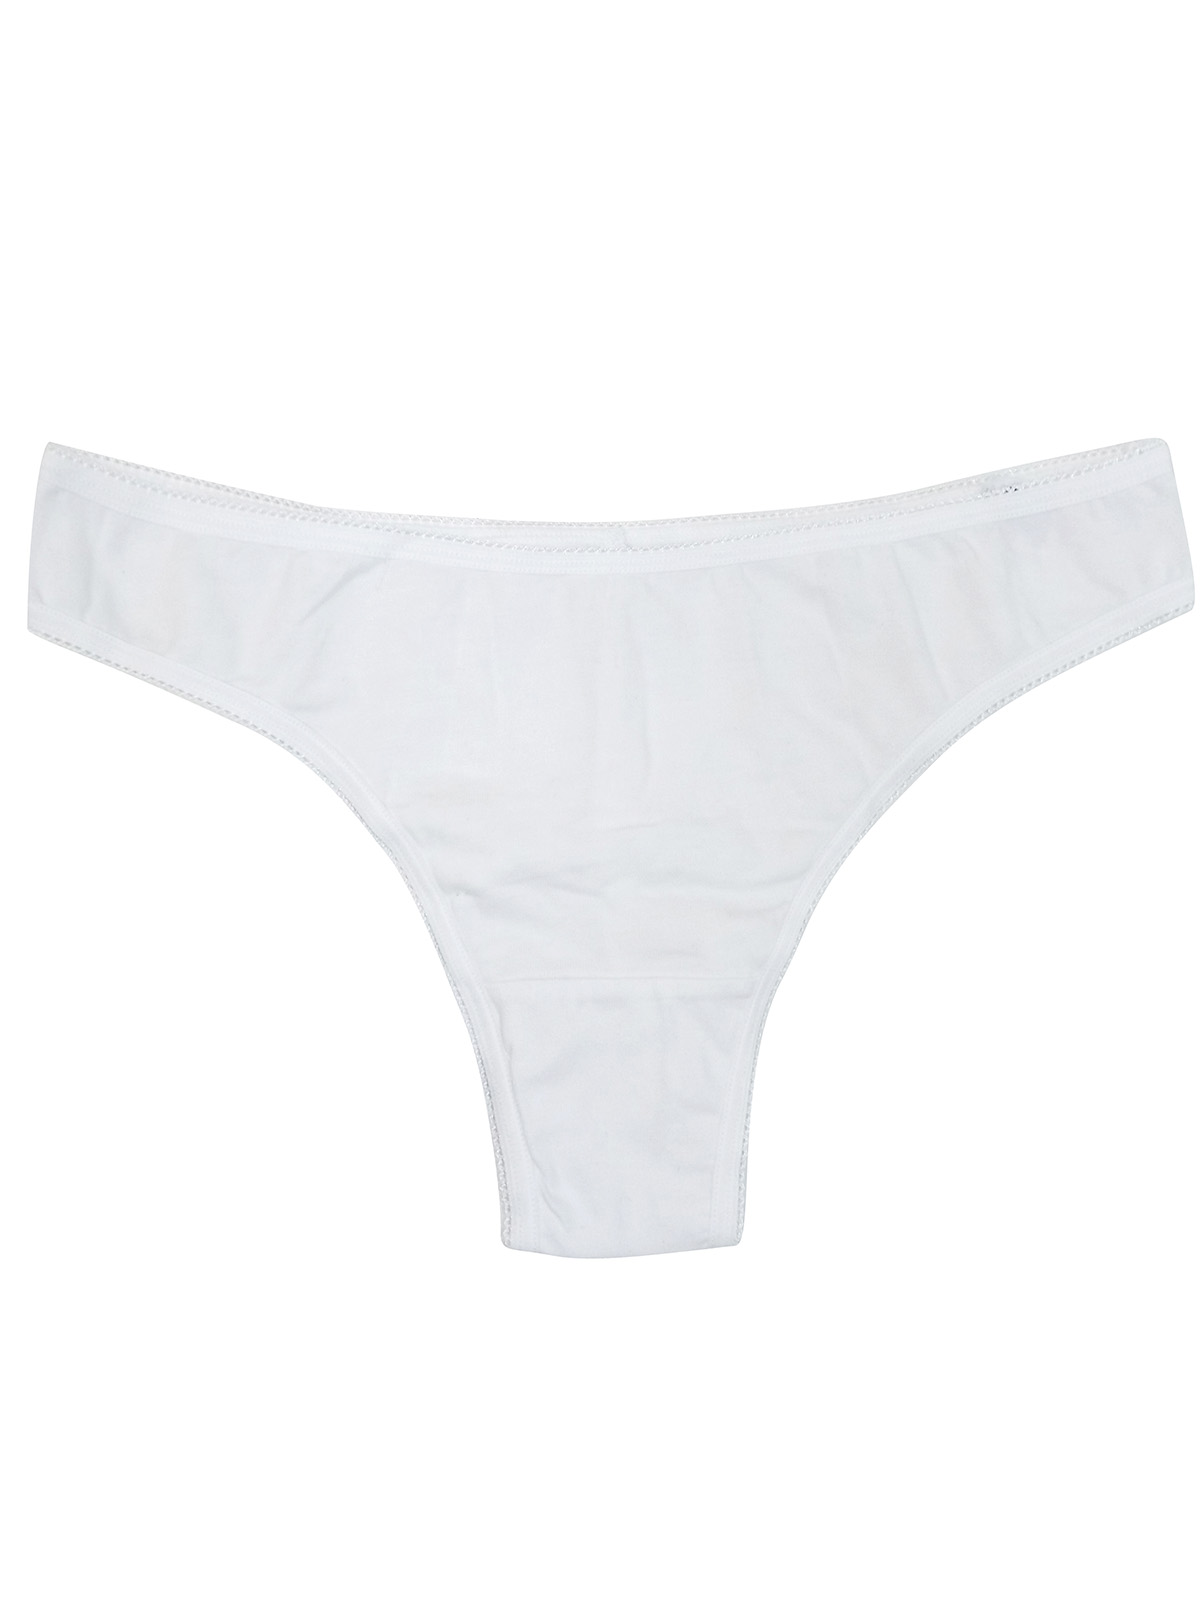 George - - G3ORGE WHITE 5-Pack Lace Brazilian Knickers - Size 10